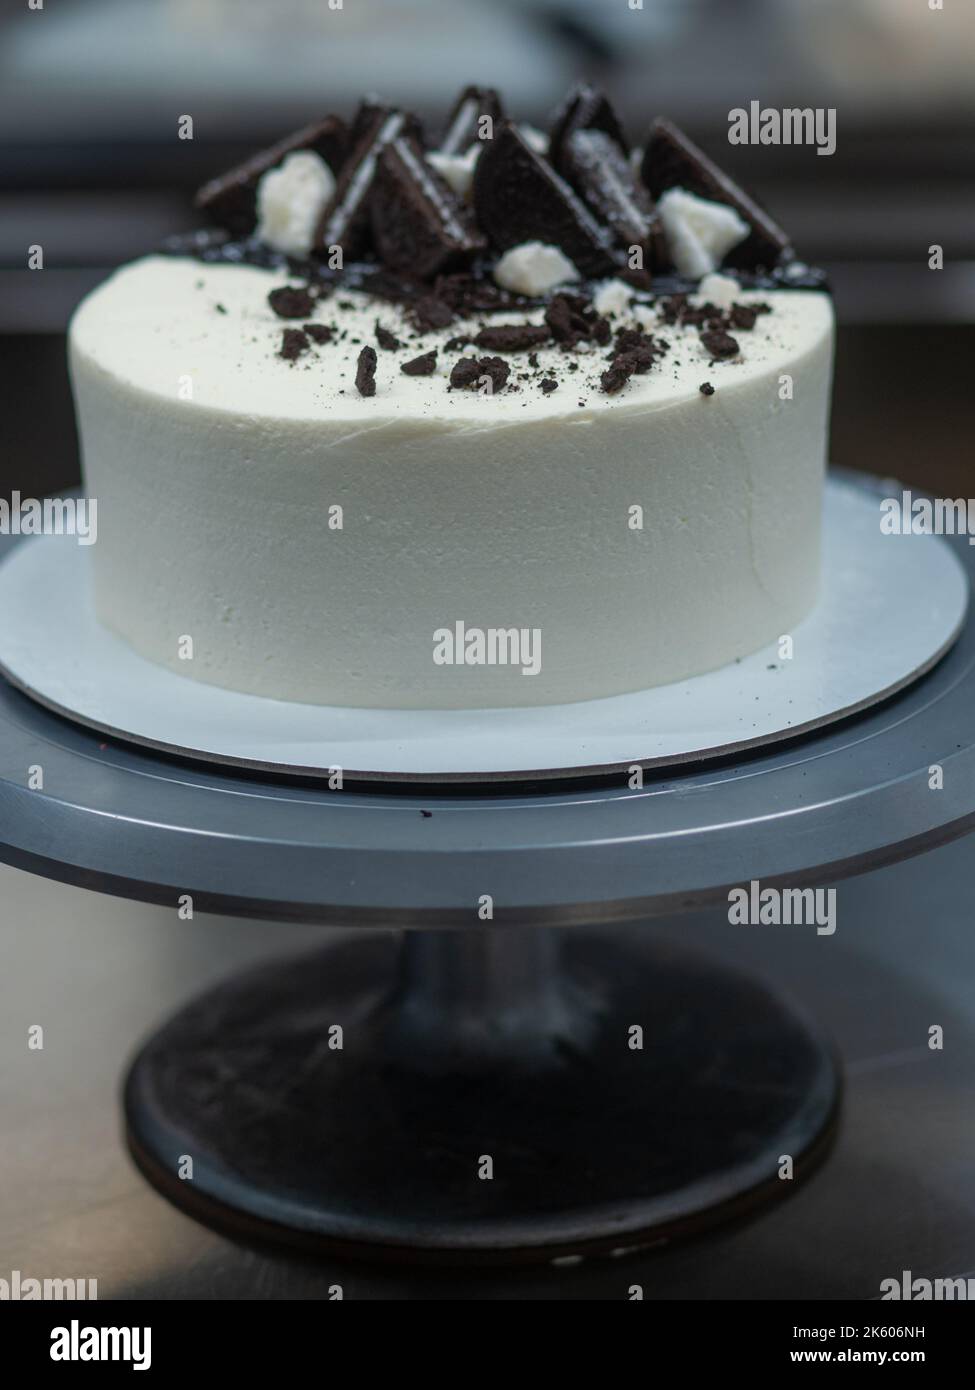 black and white frosting cake by designer Stock Photo